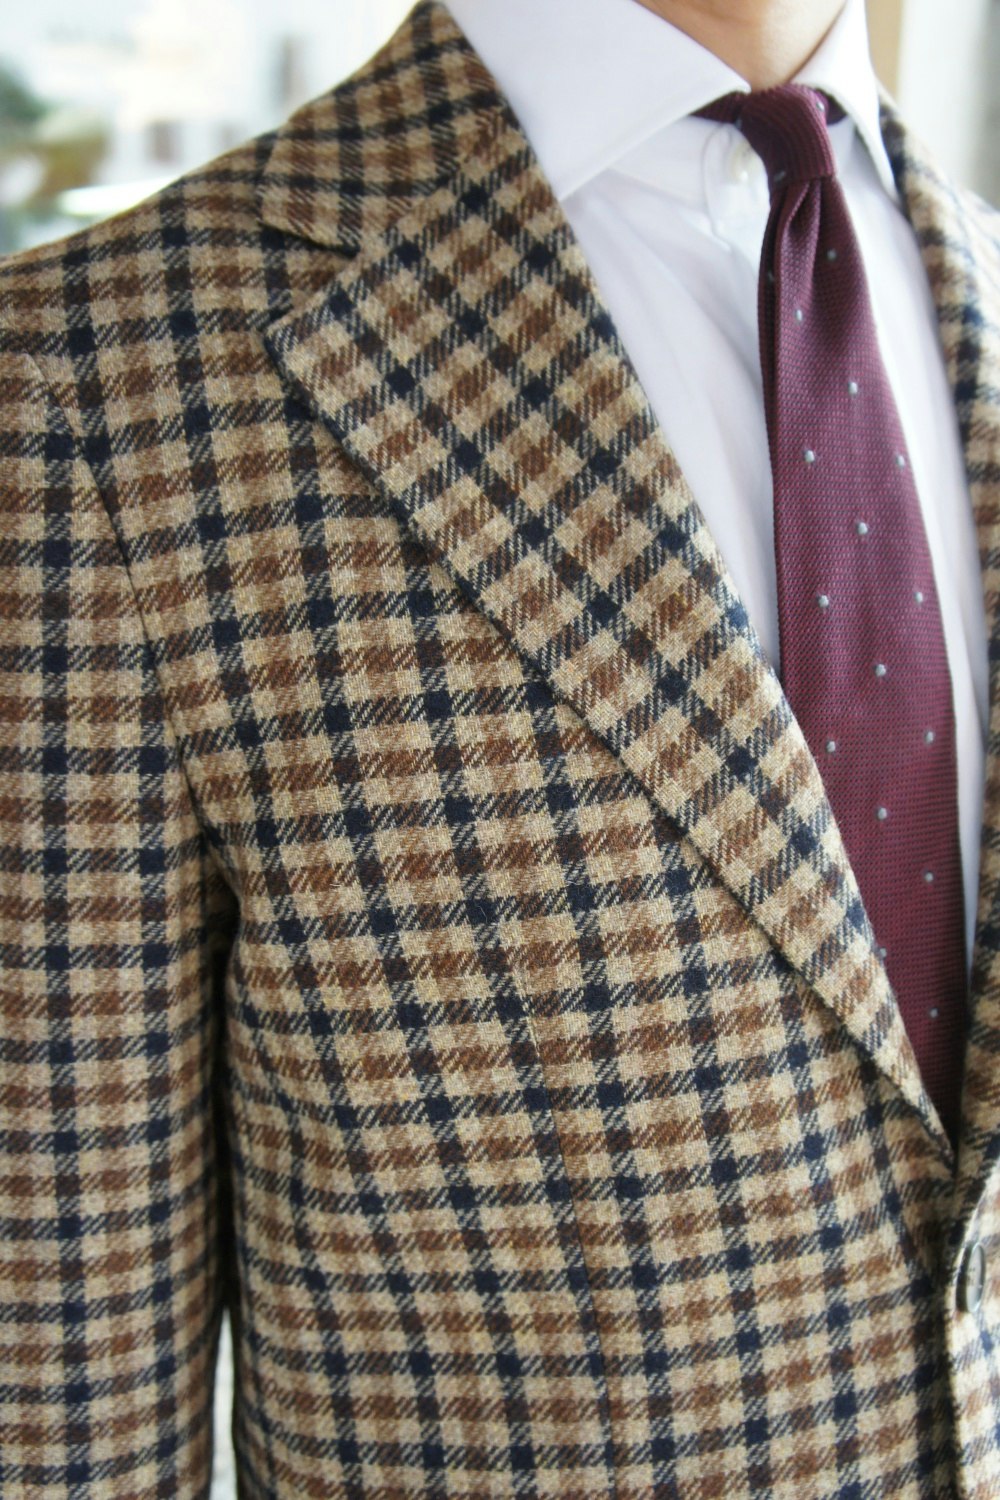 Check Wool/Cashmere Jacket - Unlined - Light Brown/Navy Blue/Brown (Size 48 left!)